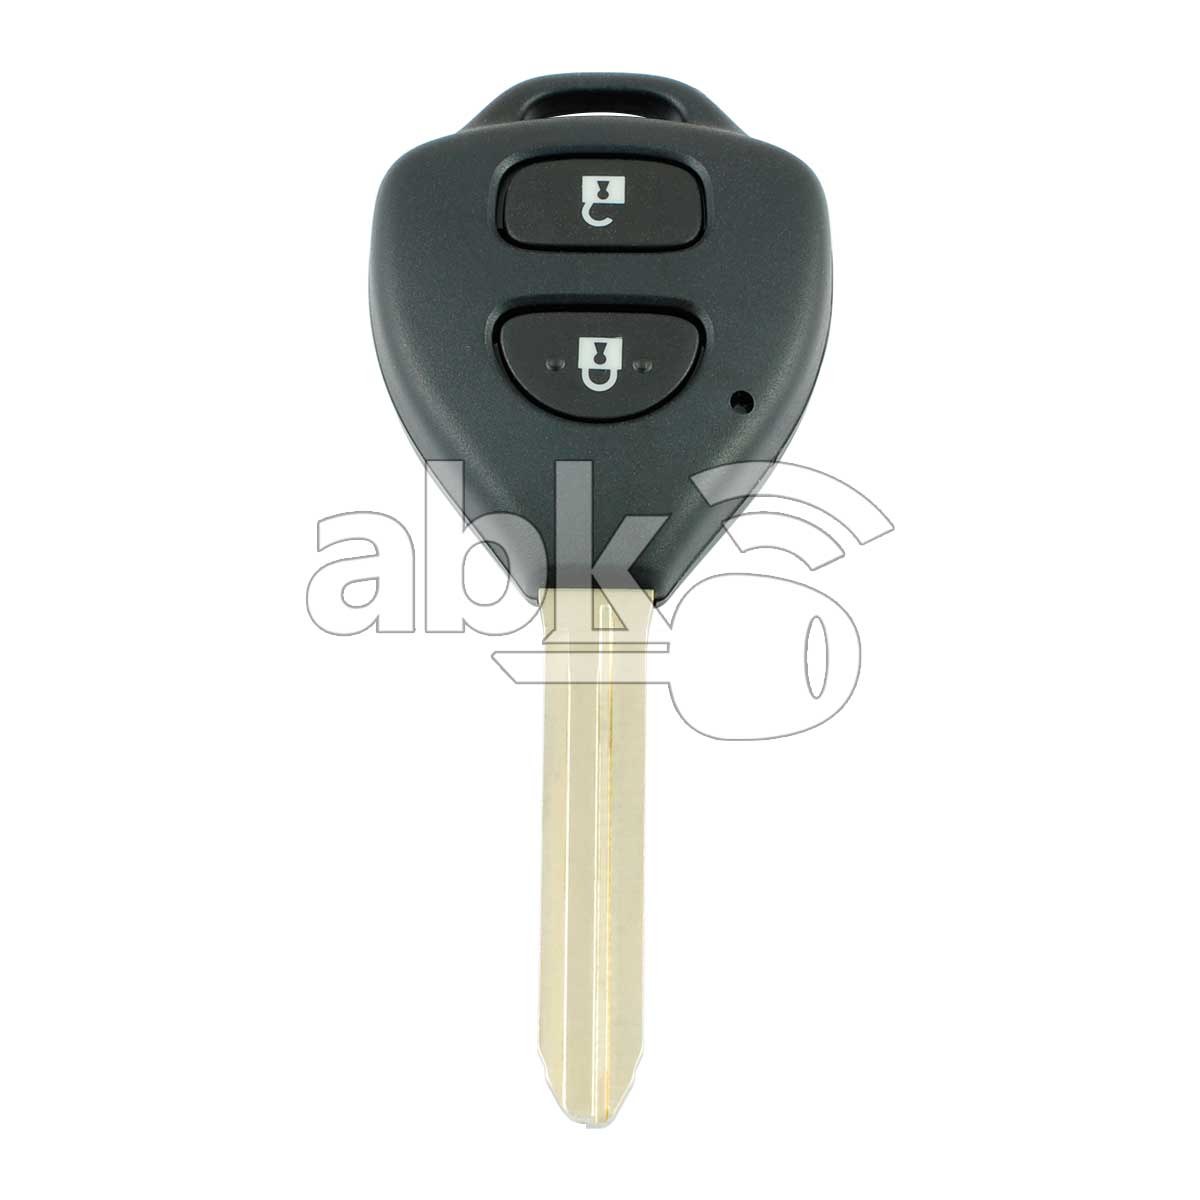 Genuine Toyota Corolla Altis 2011+ Key Head Remote 2Buttons 12BBY 433MHz TOY43 89070-02820 - 